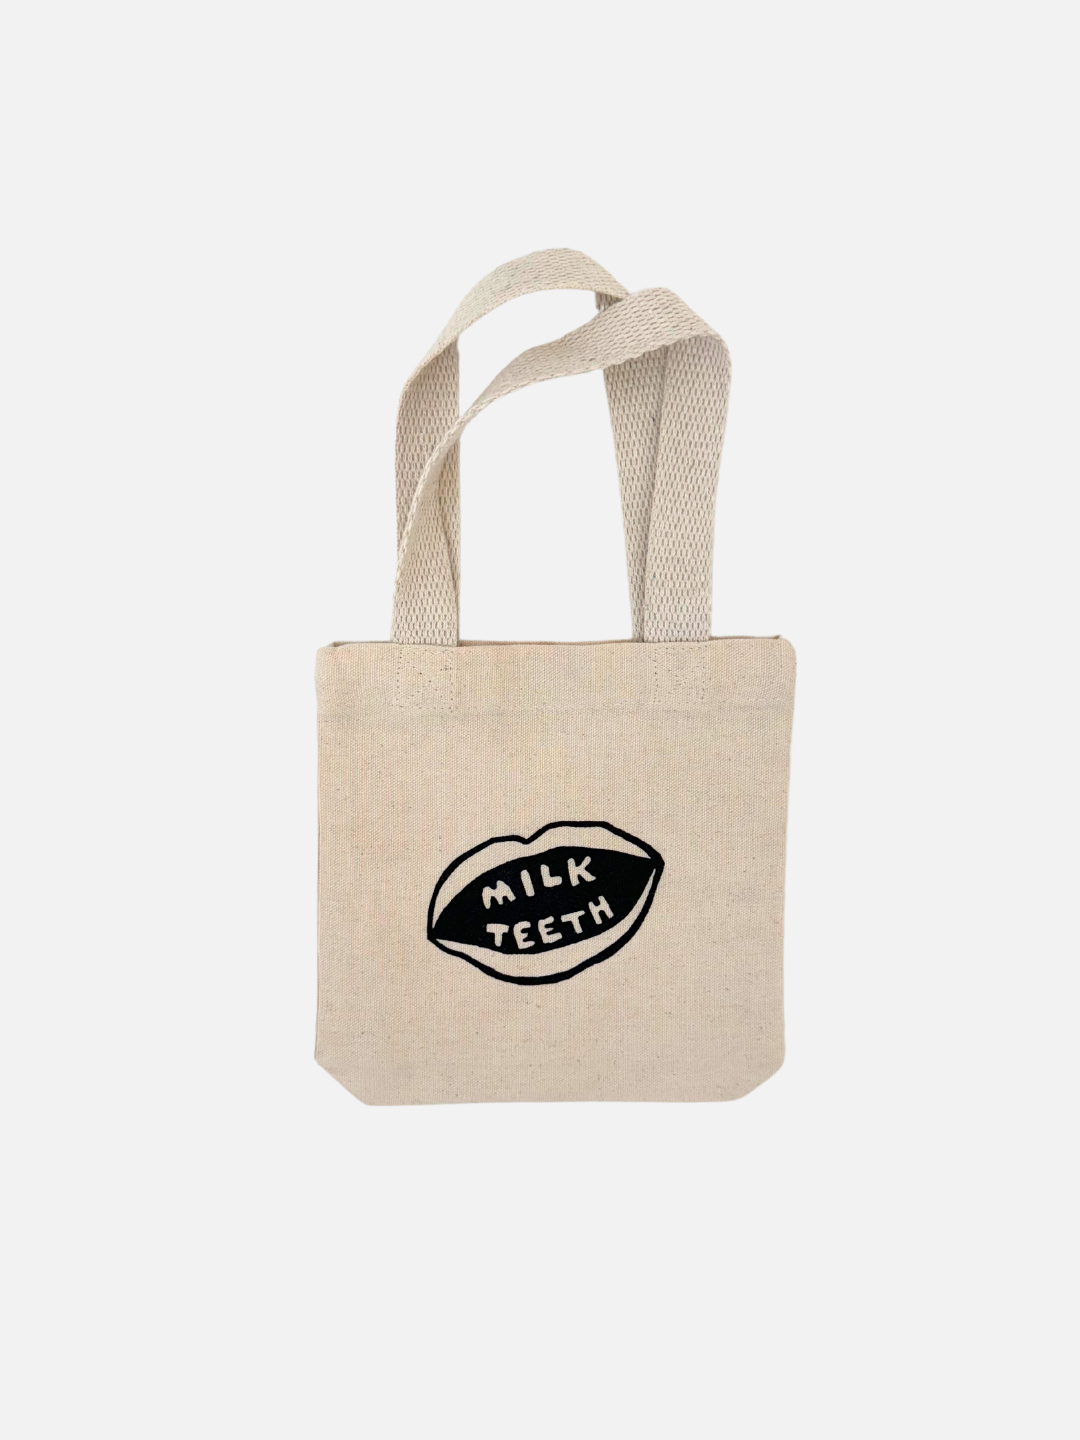  Milk Teeth mini tote front view. Cotton tote with Milk Teeth mouth logo in the center.